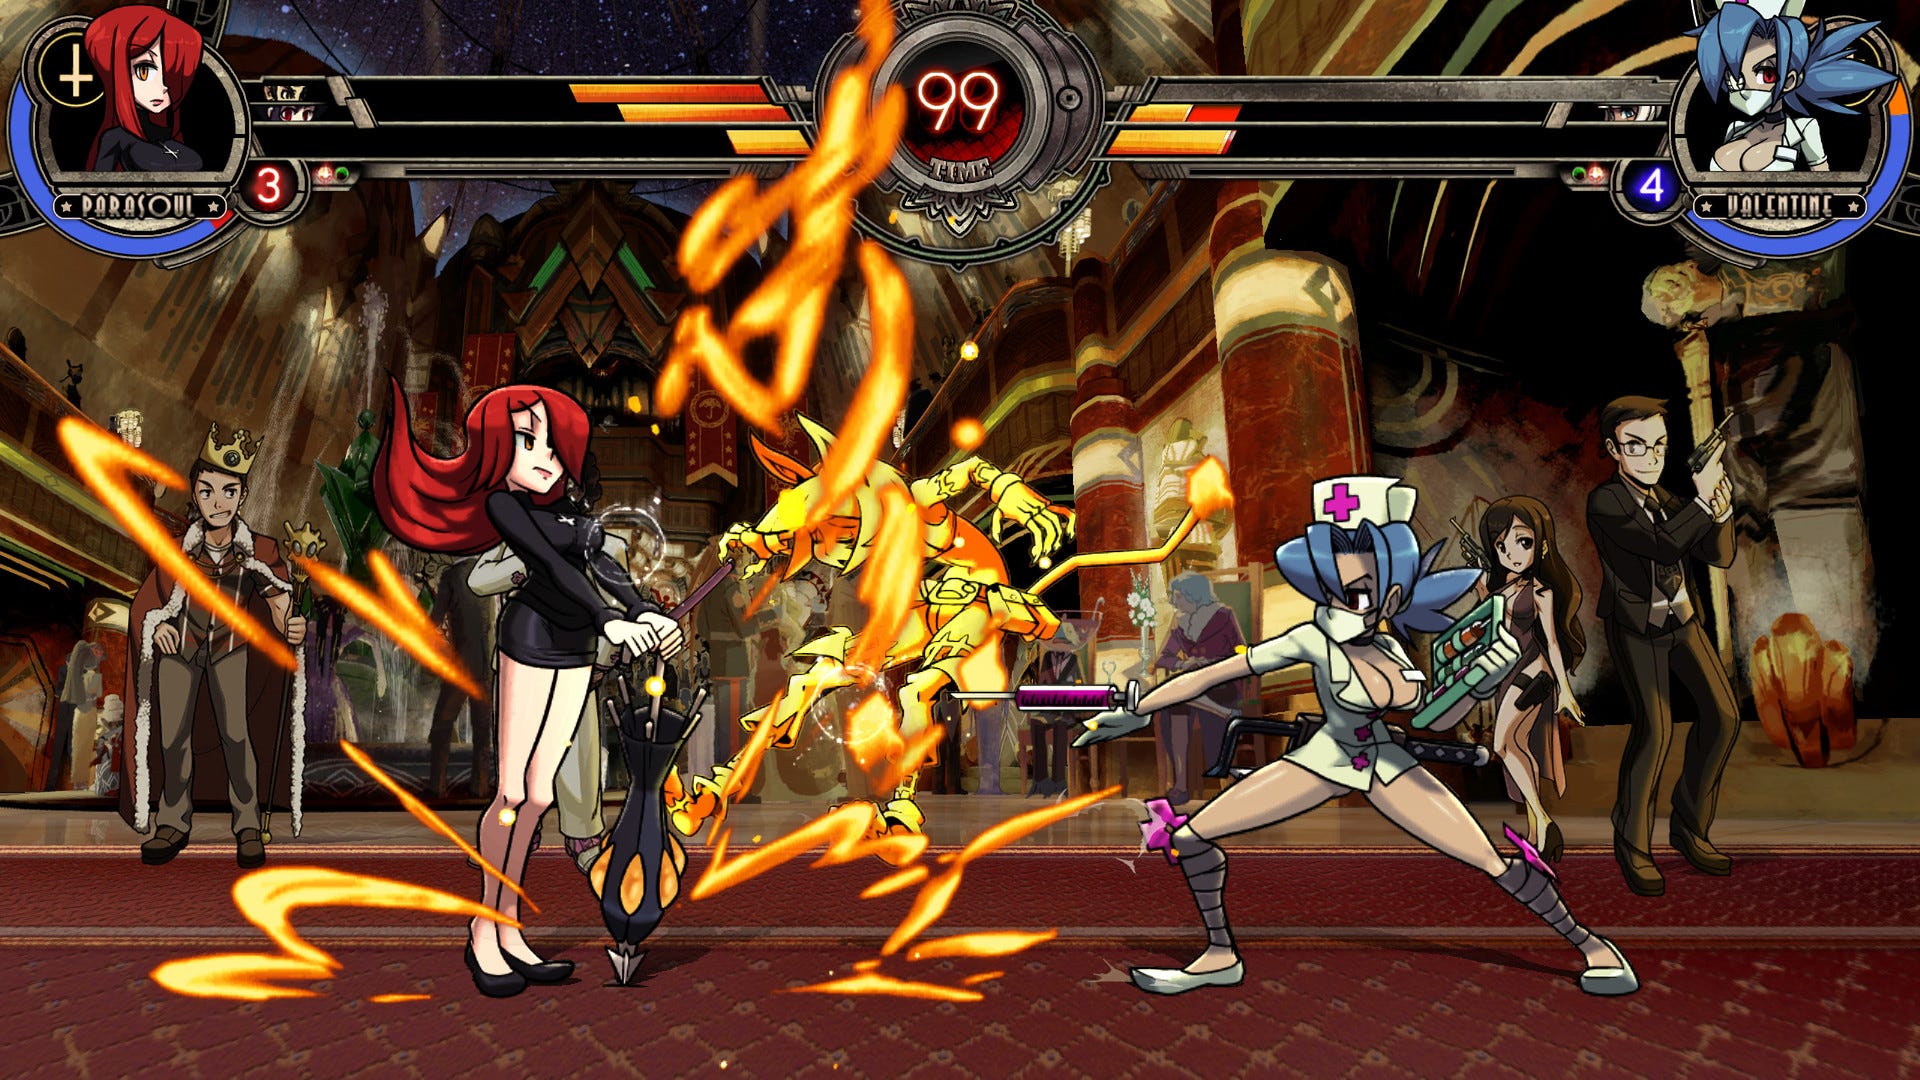 A screenshot form Skullgirls. Two women face off in a cartoon fighting game.